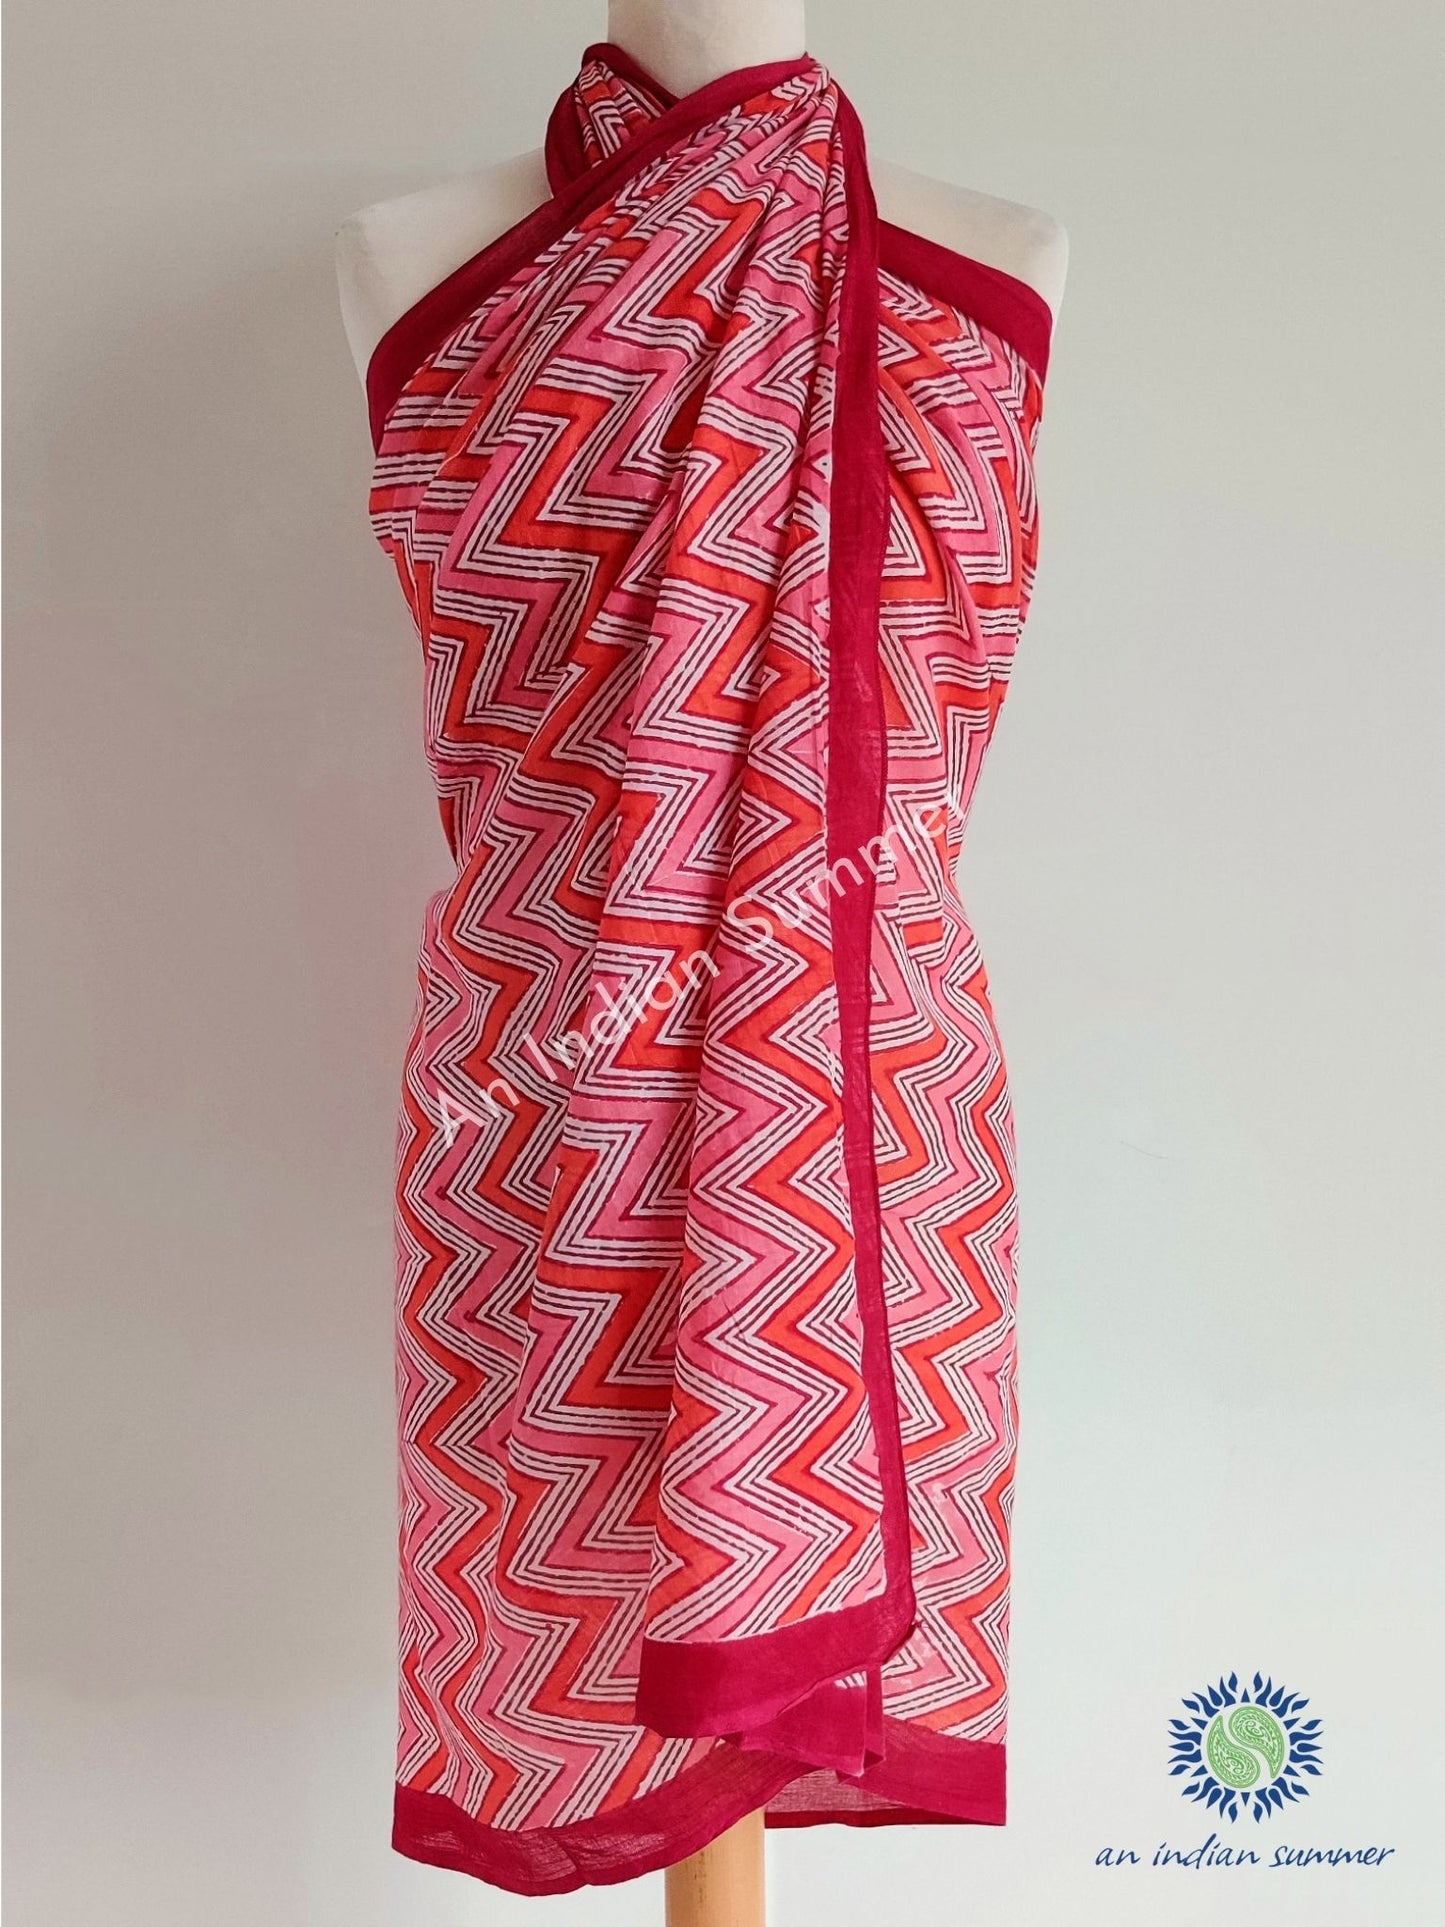 Chevron Sarong Pareo | Pink & Orange | Geometric Print | Hand Block Printed | Soft Cotton Voile | An Indian Summer | Seasonless Timeless Sustainable Ethical Authentic Artisan Conscious Clothing Lifestyle Brand